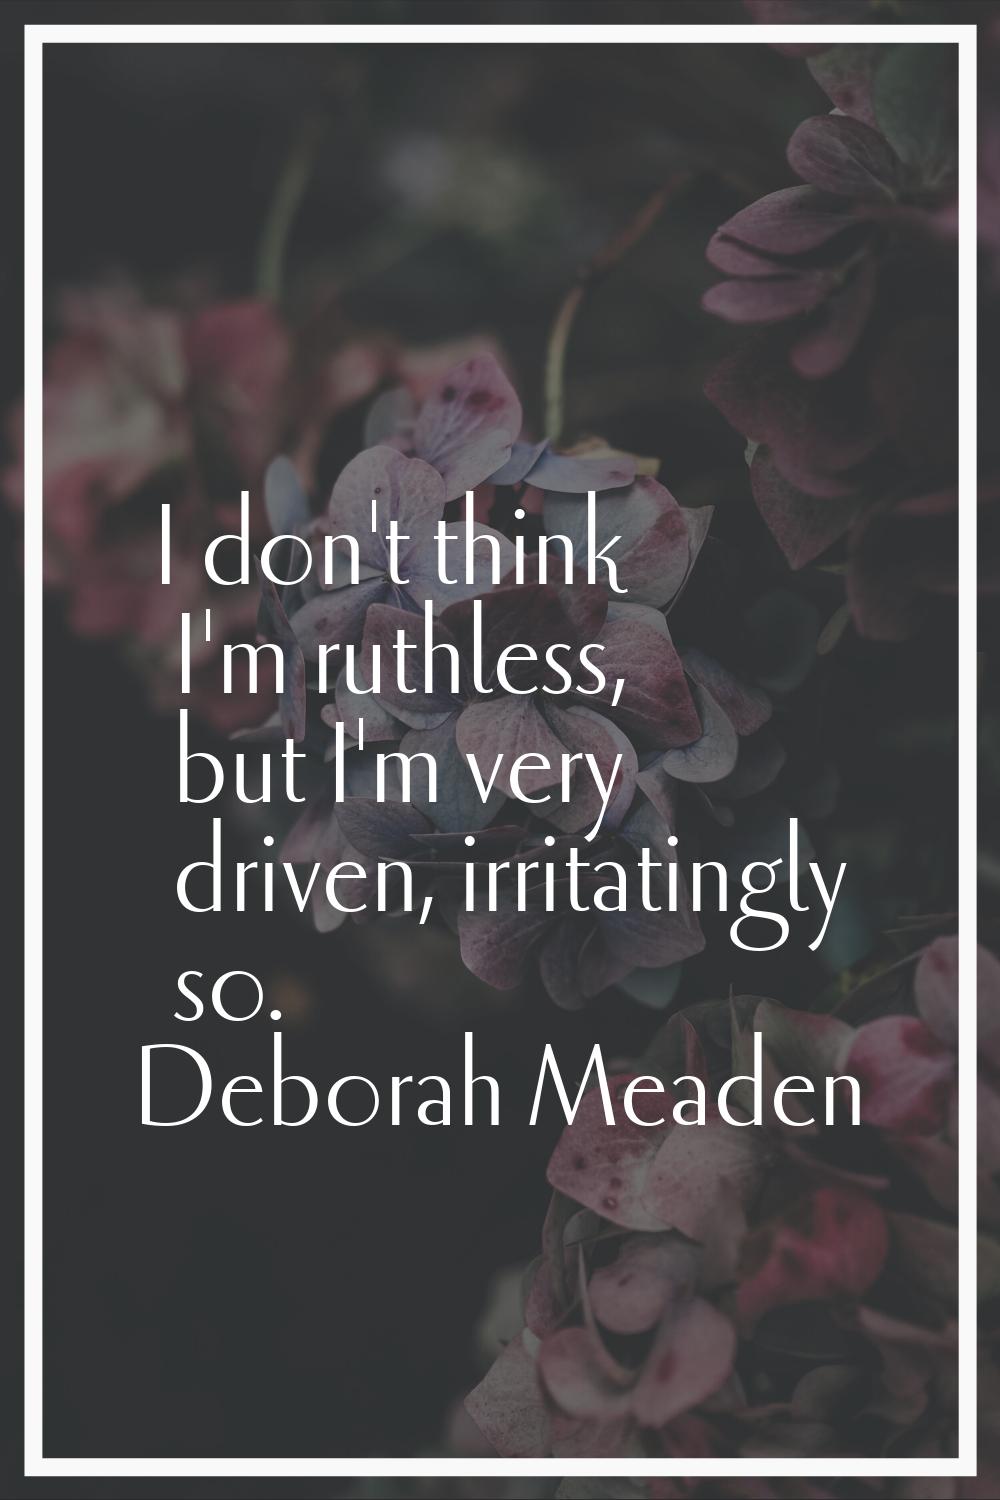 I don't think I'm ruthless, but I'm very driven, irritatingly so.